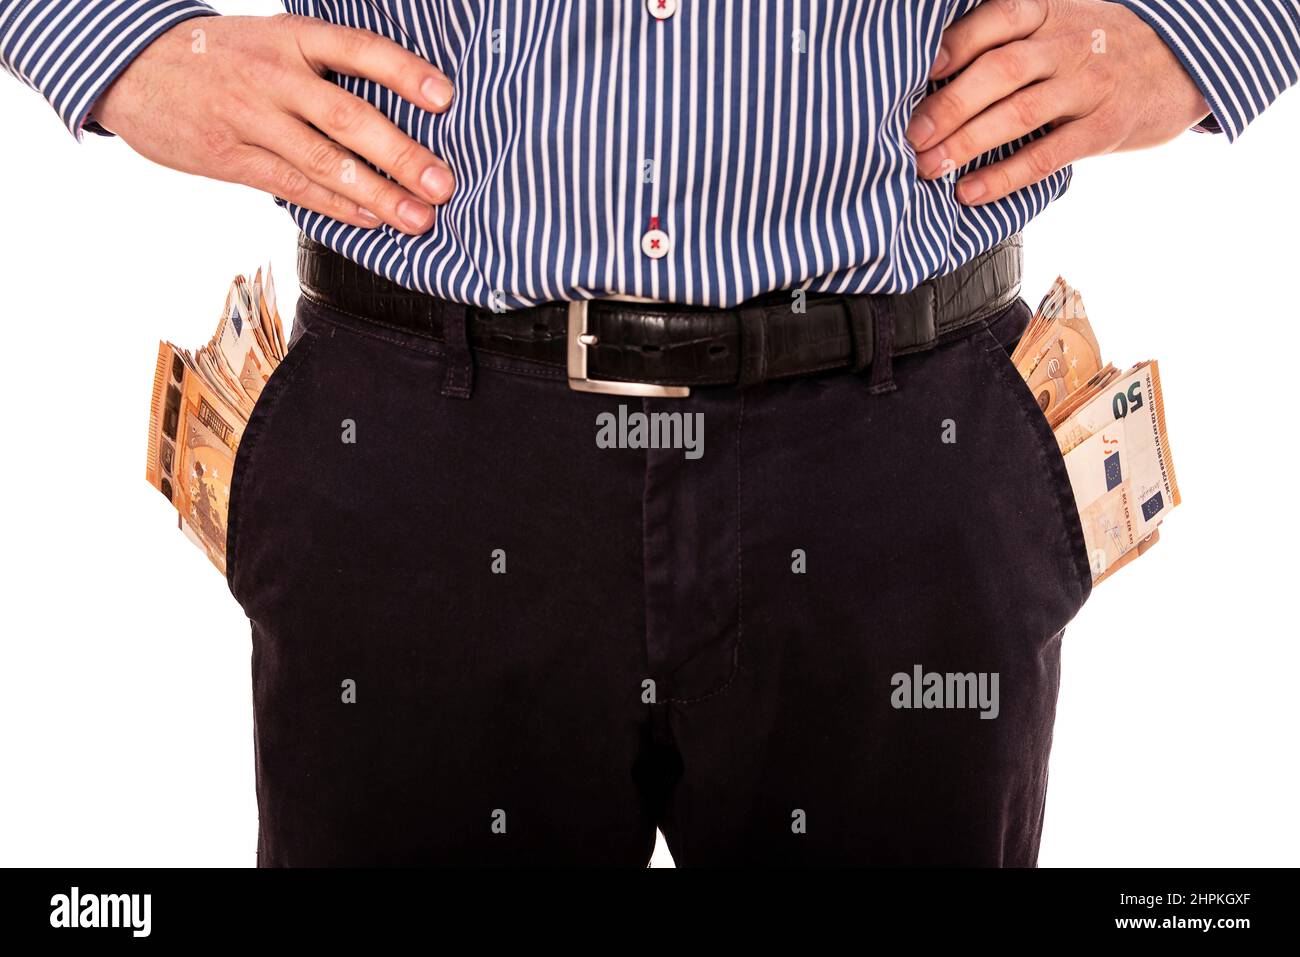 Hands Pants Pocket Without Money Stock Photo 1173369598